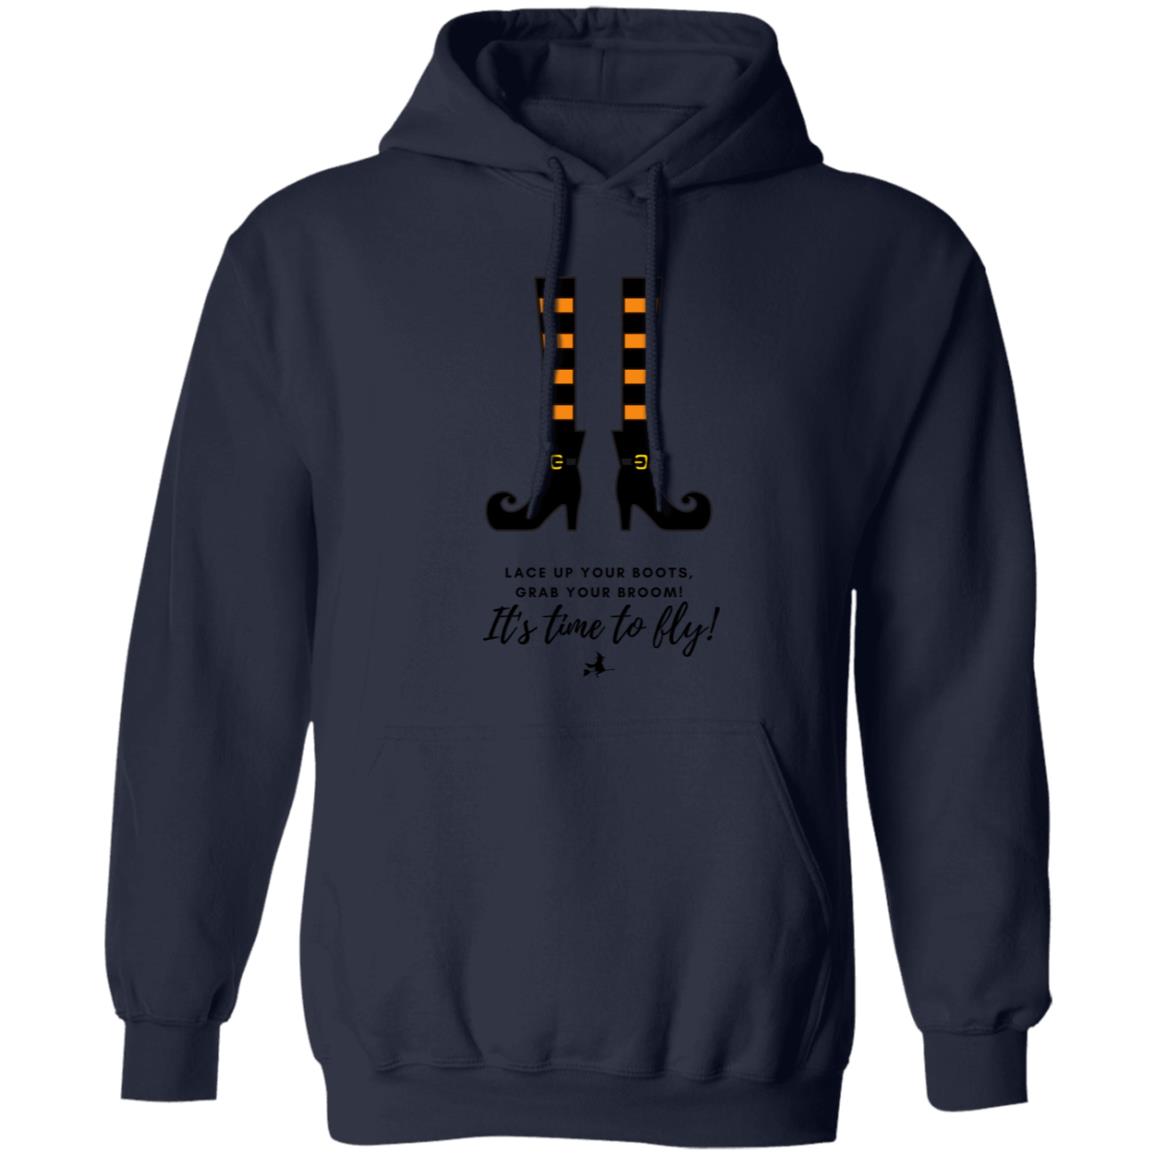 Lace up your boots T Shirt Lace Up Your Boots, Grab Your Broom - It's Time to Fly Hoodie